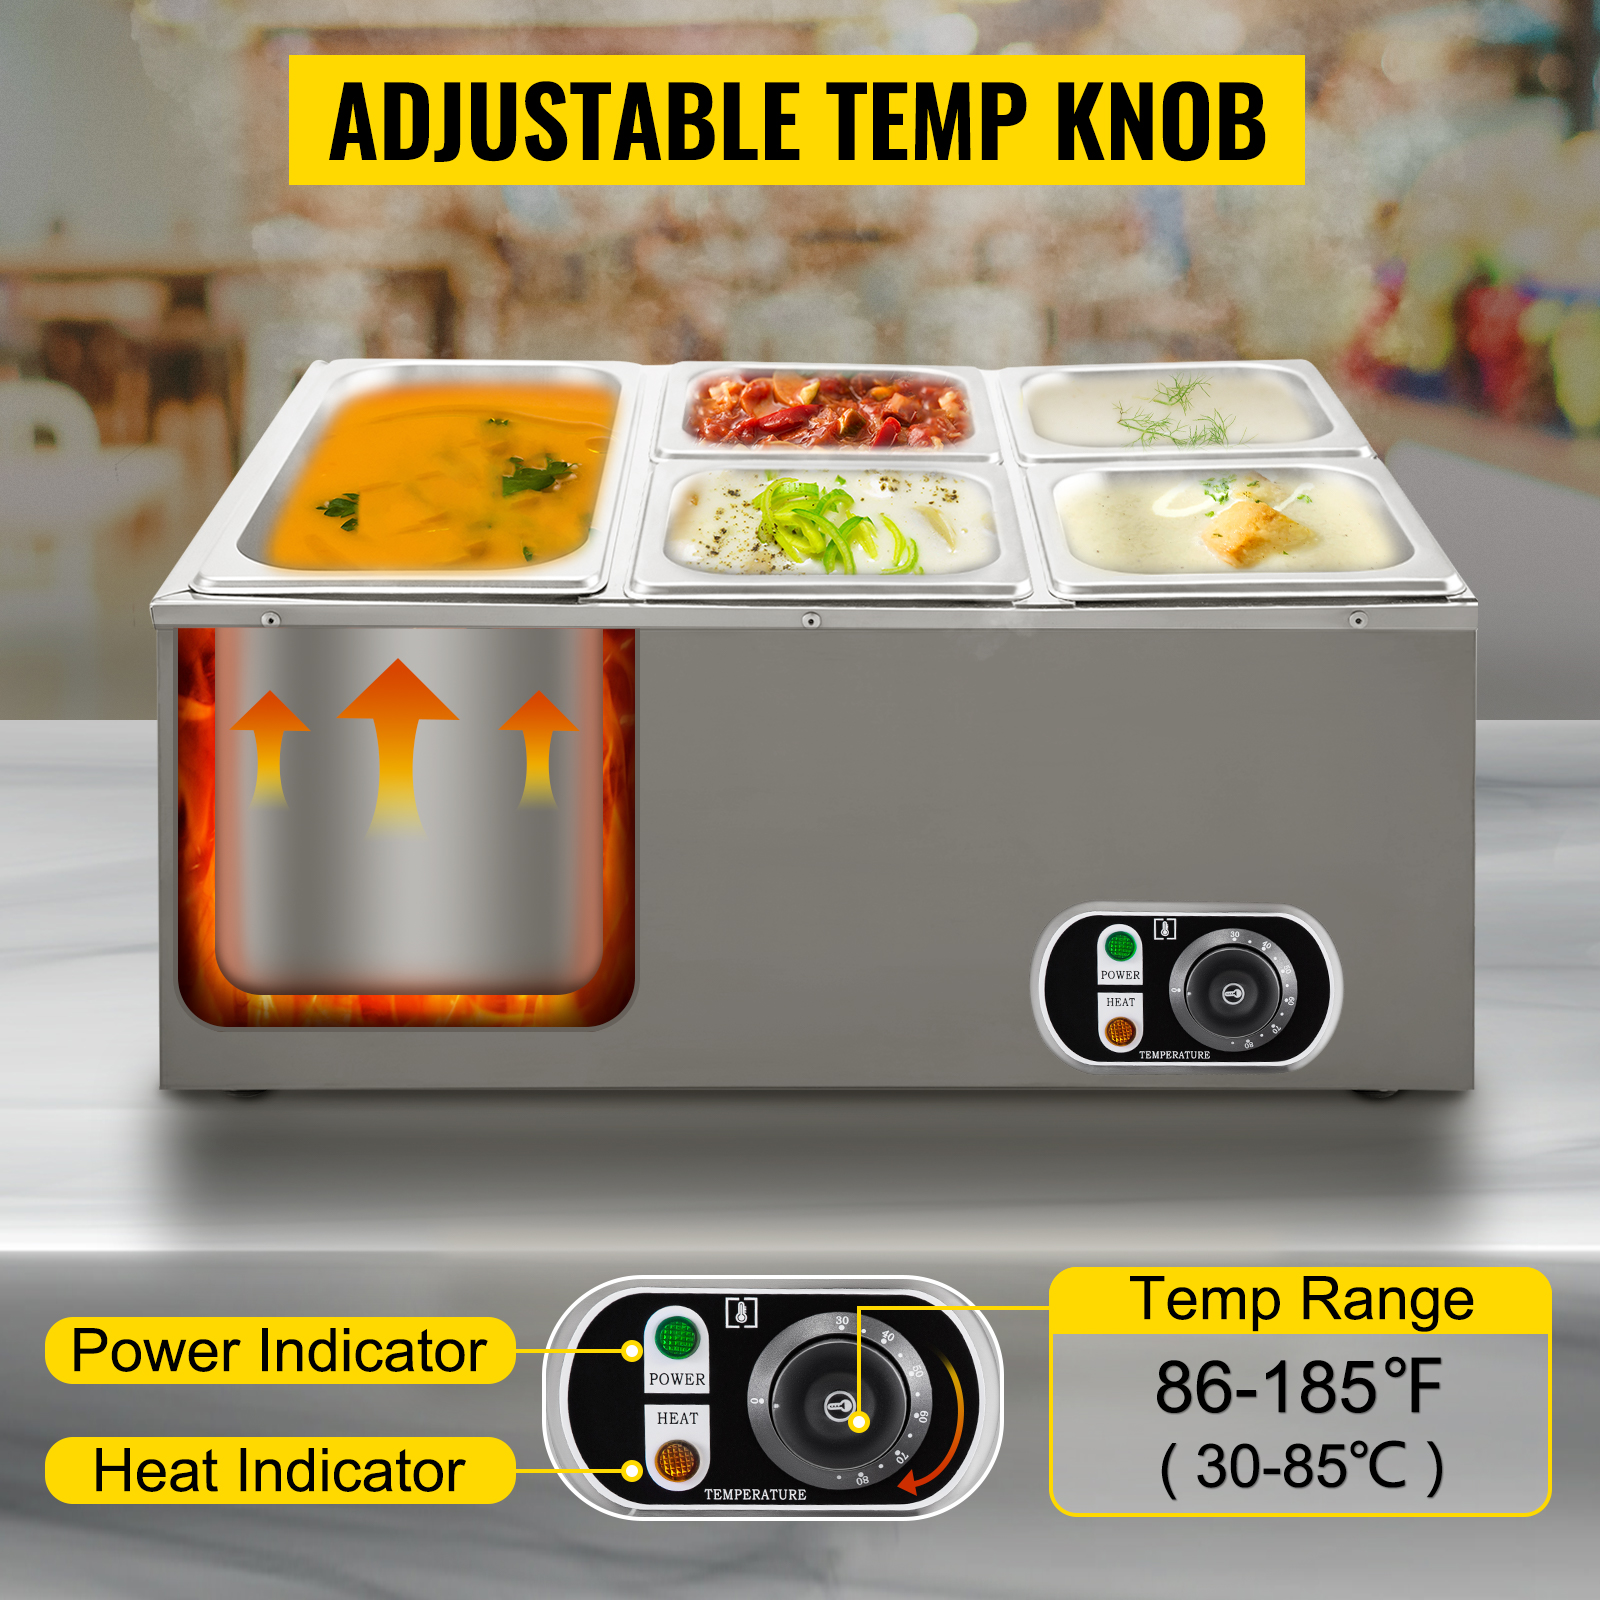 VEVOR Food Warmer – For Personal Or Commercial Food Warming